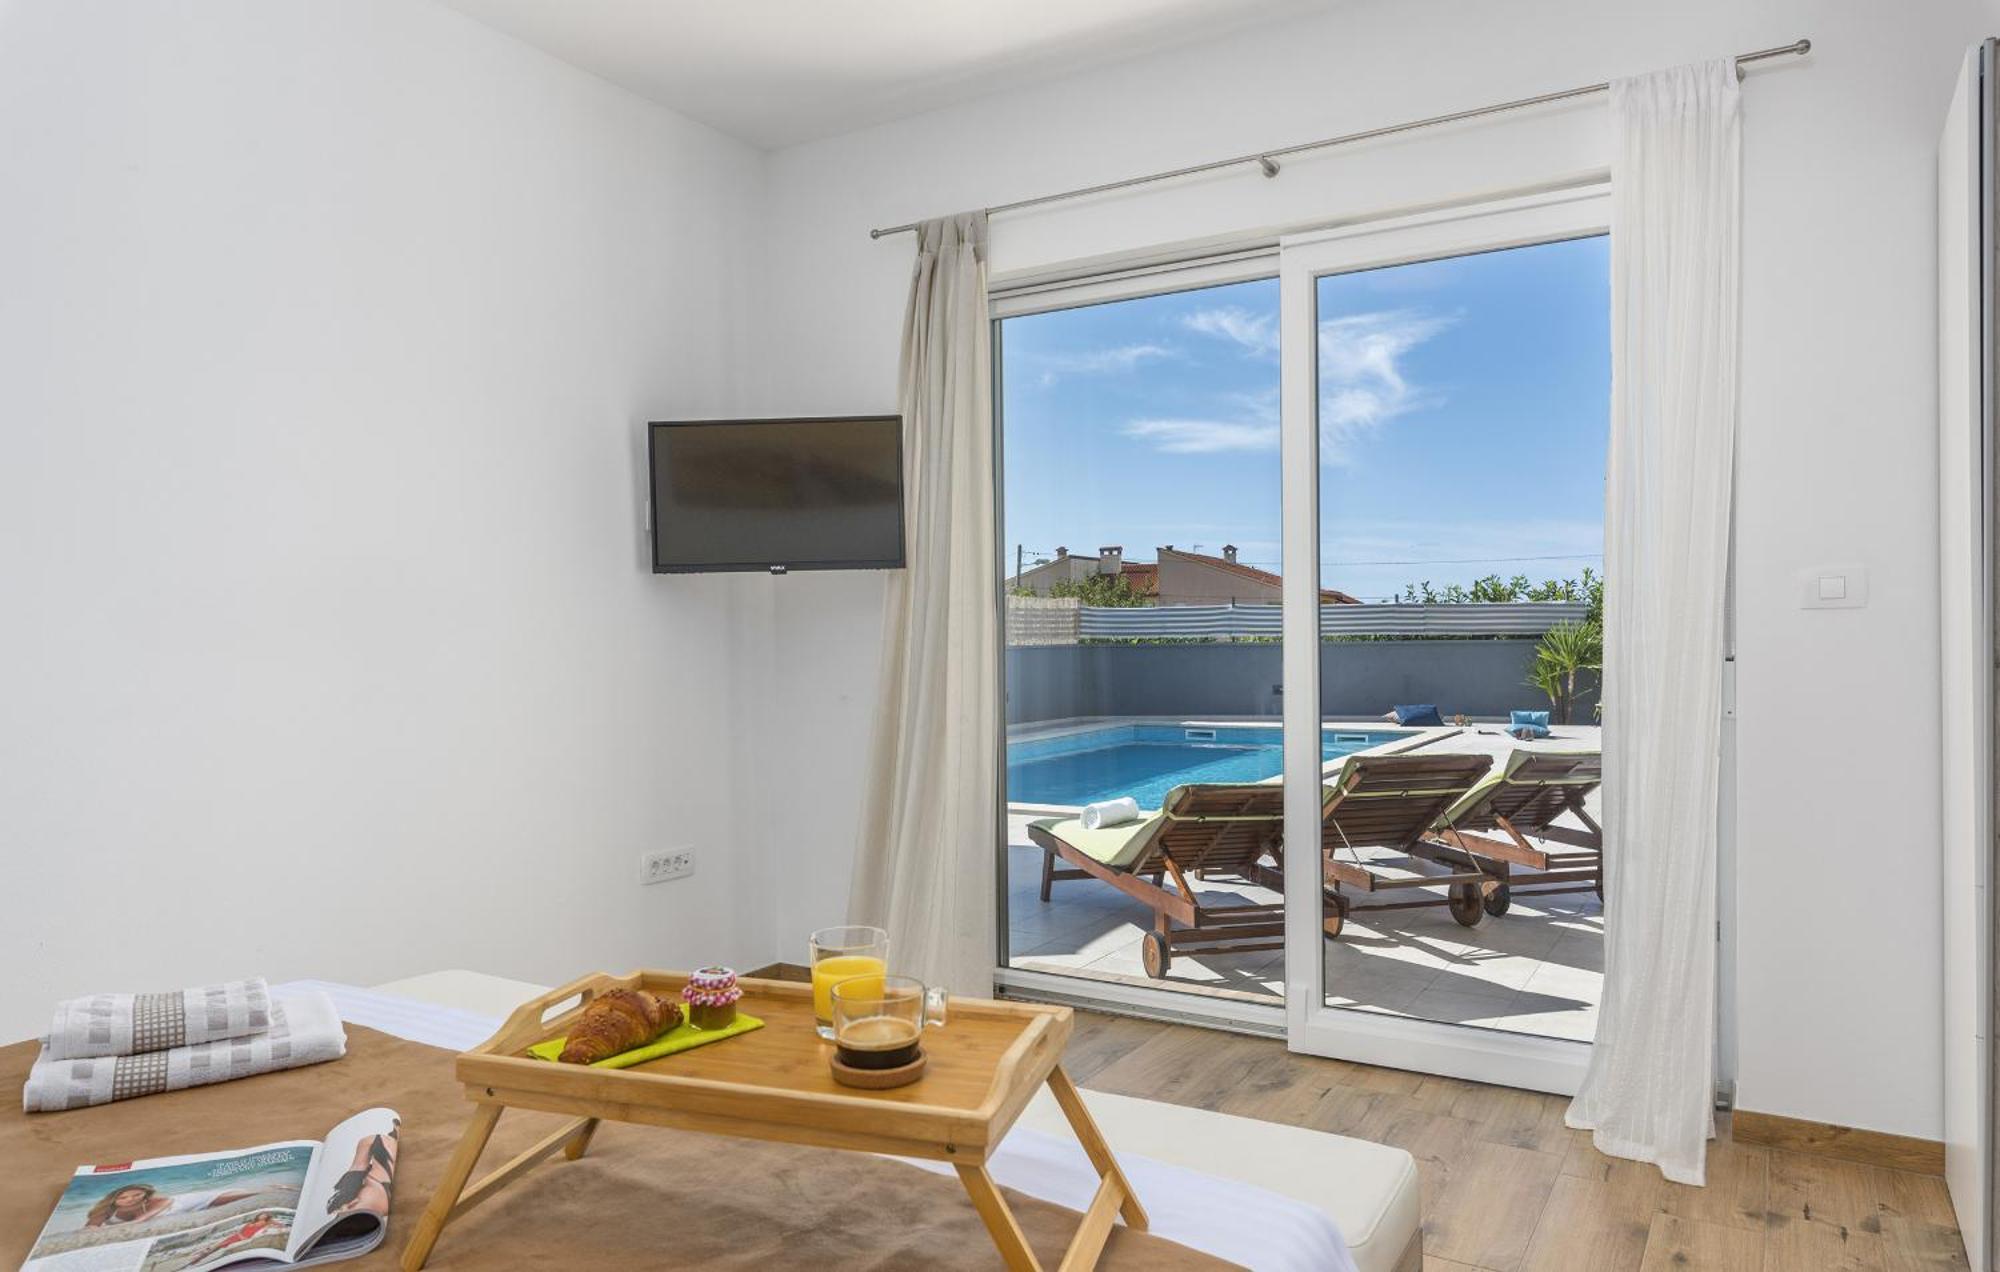 Modern Villa Ol&Ju For 9 Persons In Pula Only 1.5 Km From The Beach With Pool Heating 外观 照片